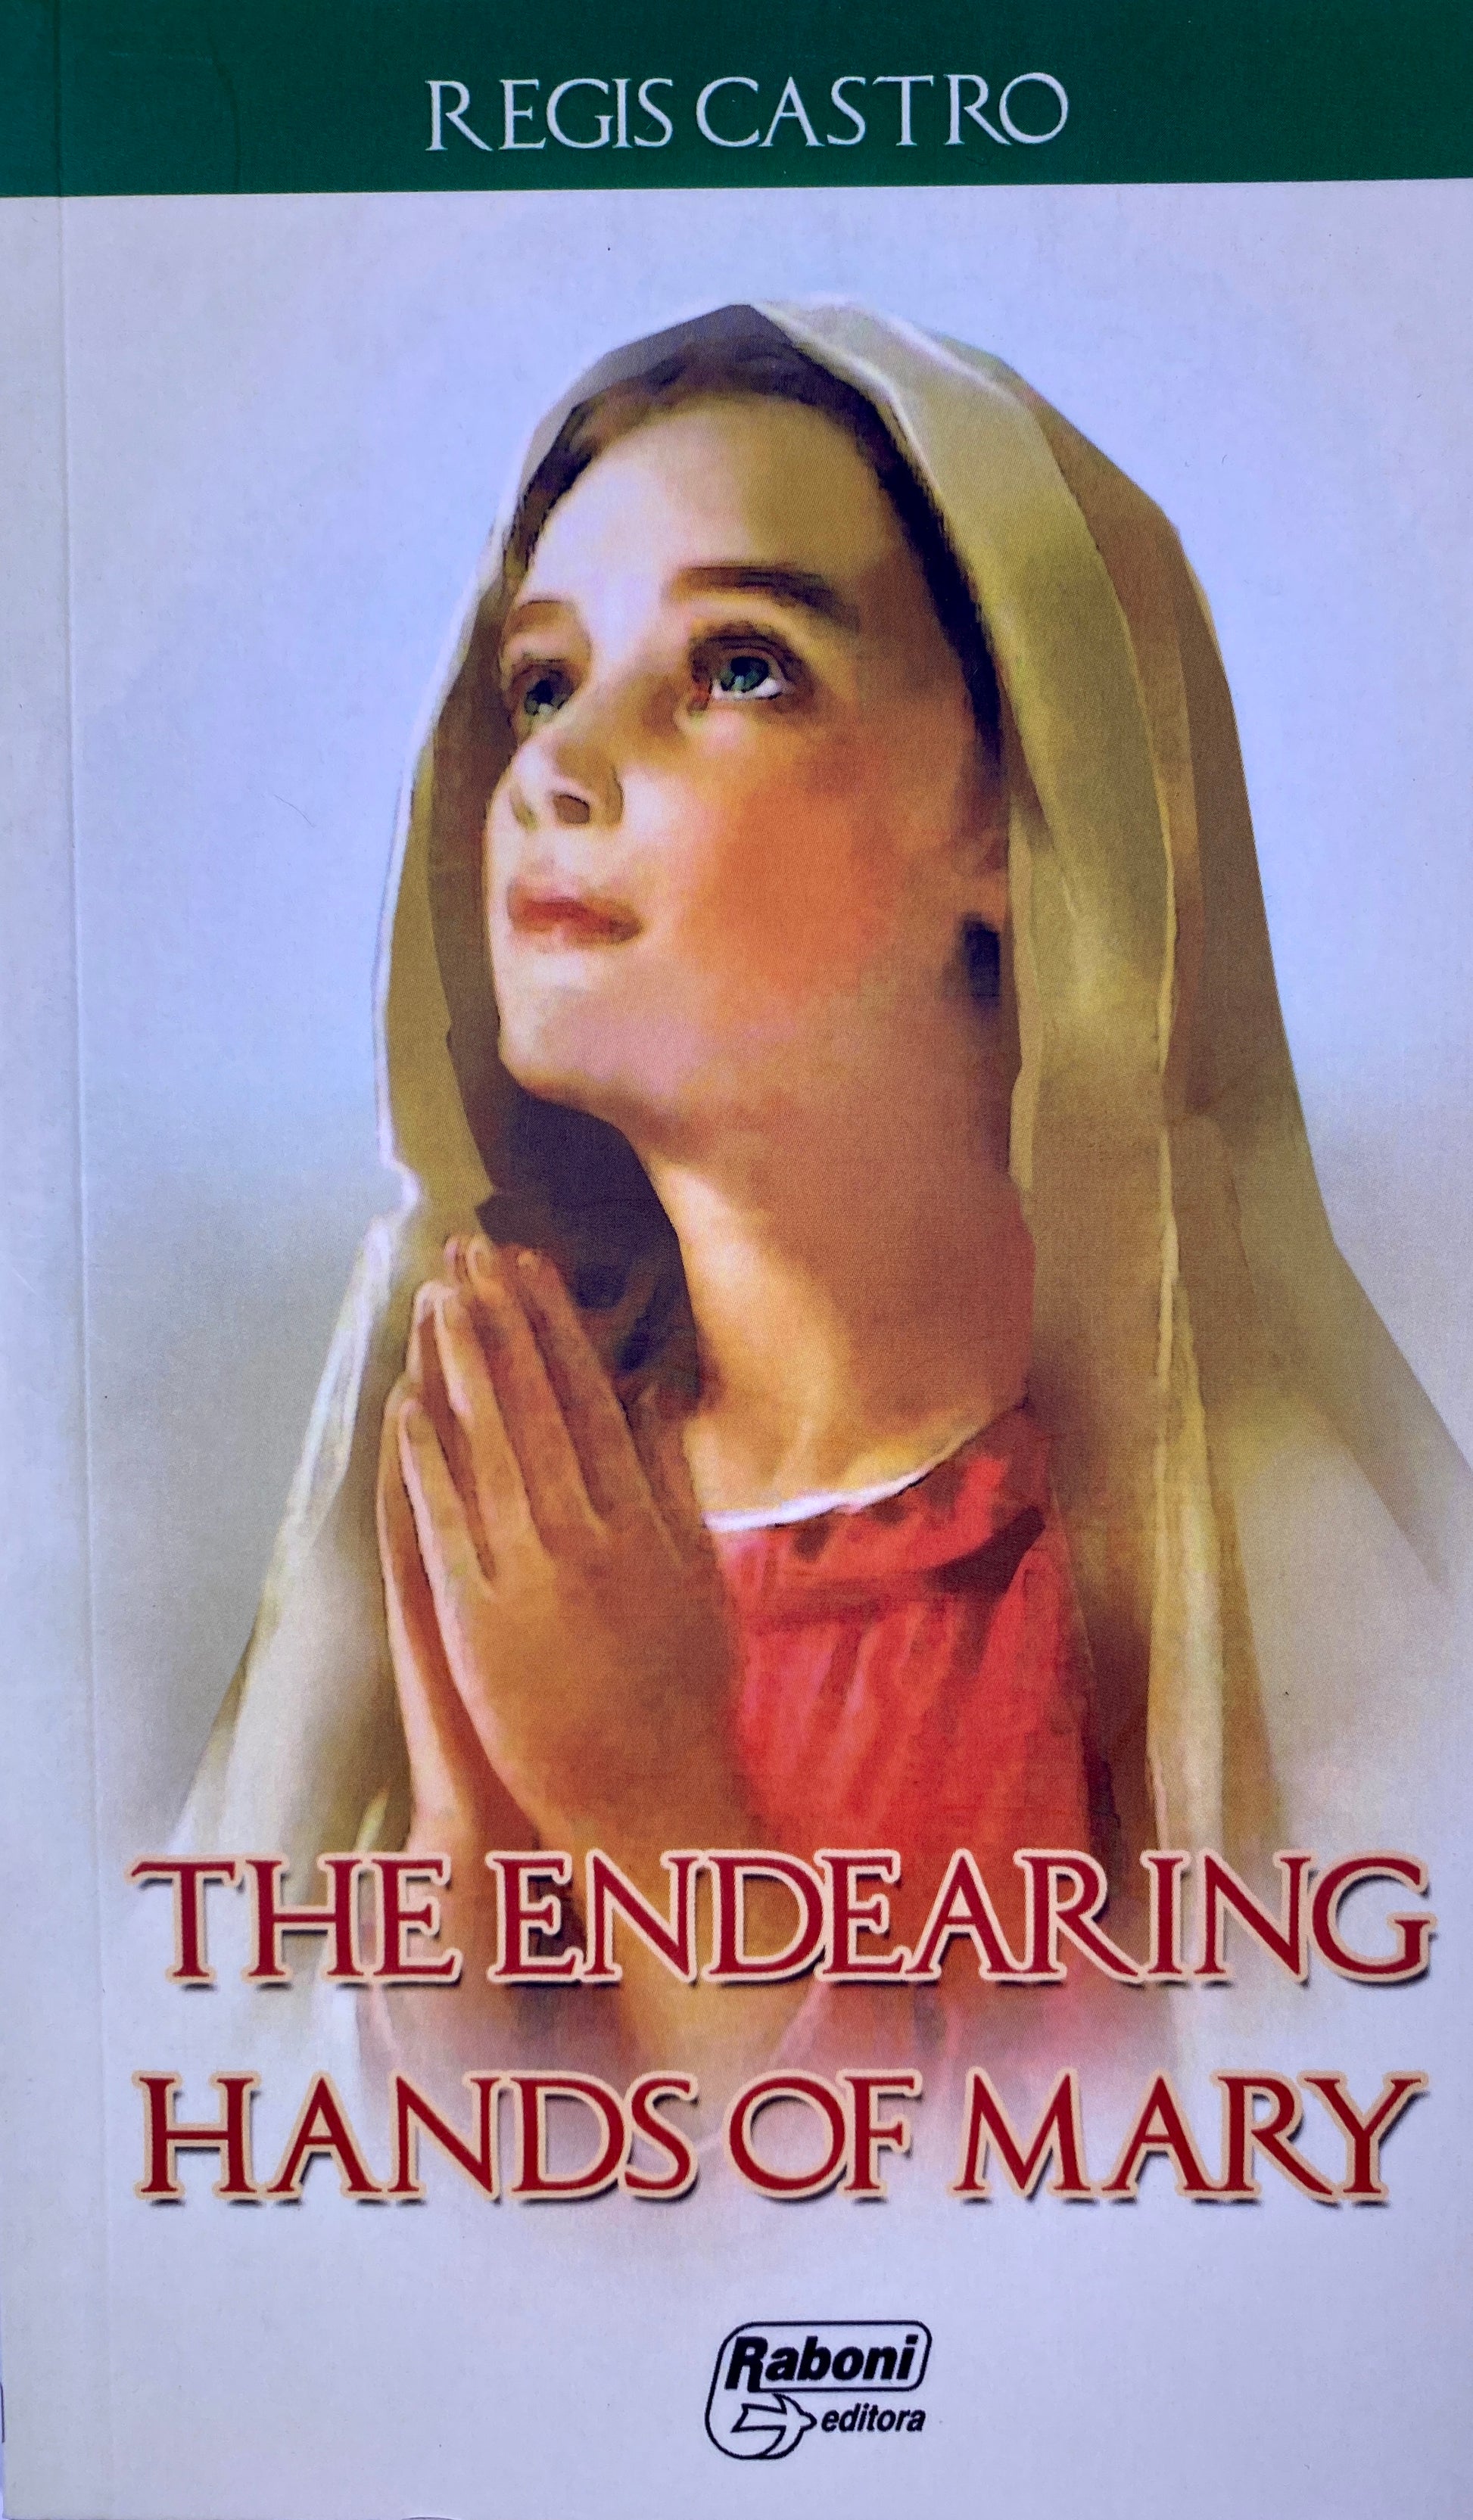 In Santa María del Monte, catholic bookstore, our goal is to evangelize and our products help us to do so, that is why we present you the book: "The endearing hands of Mary" dedicated  to the Virgin Mary as a token of my love and gratitude, and in reparation for so many  offenses committed against her Immaculate heart. Find it in our books section and help us carry the message of Christ. ¡Our products speak for themselves!